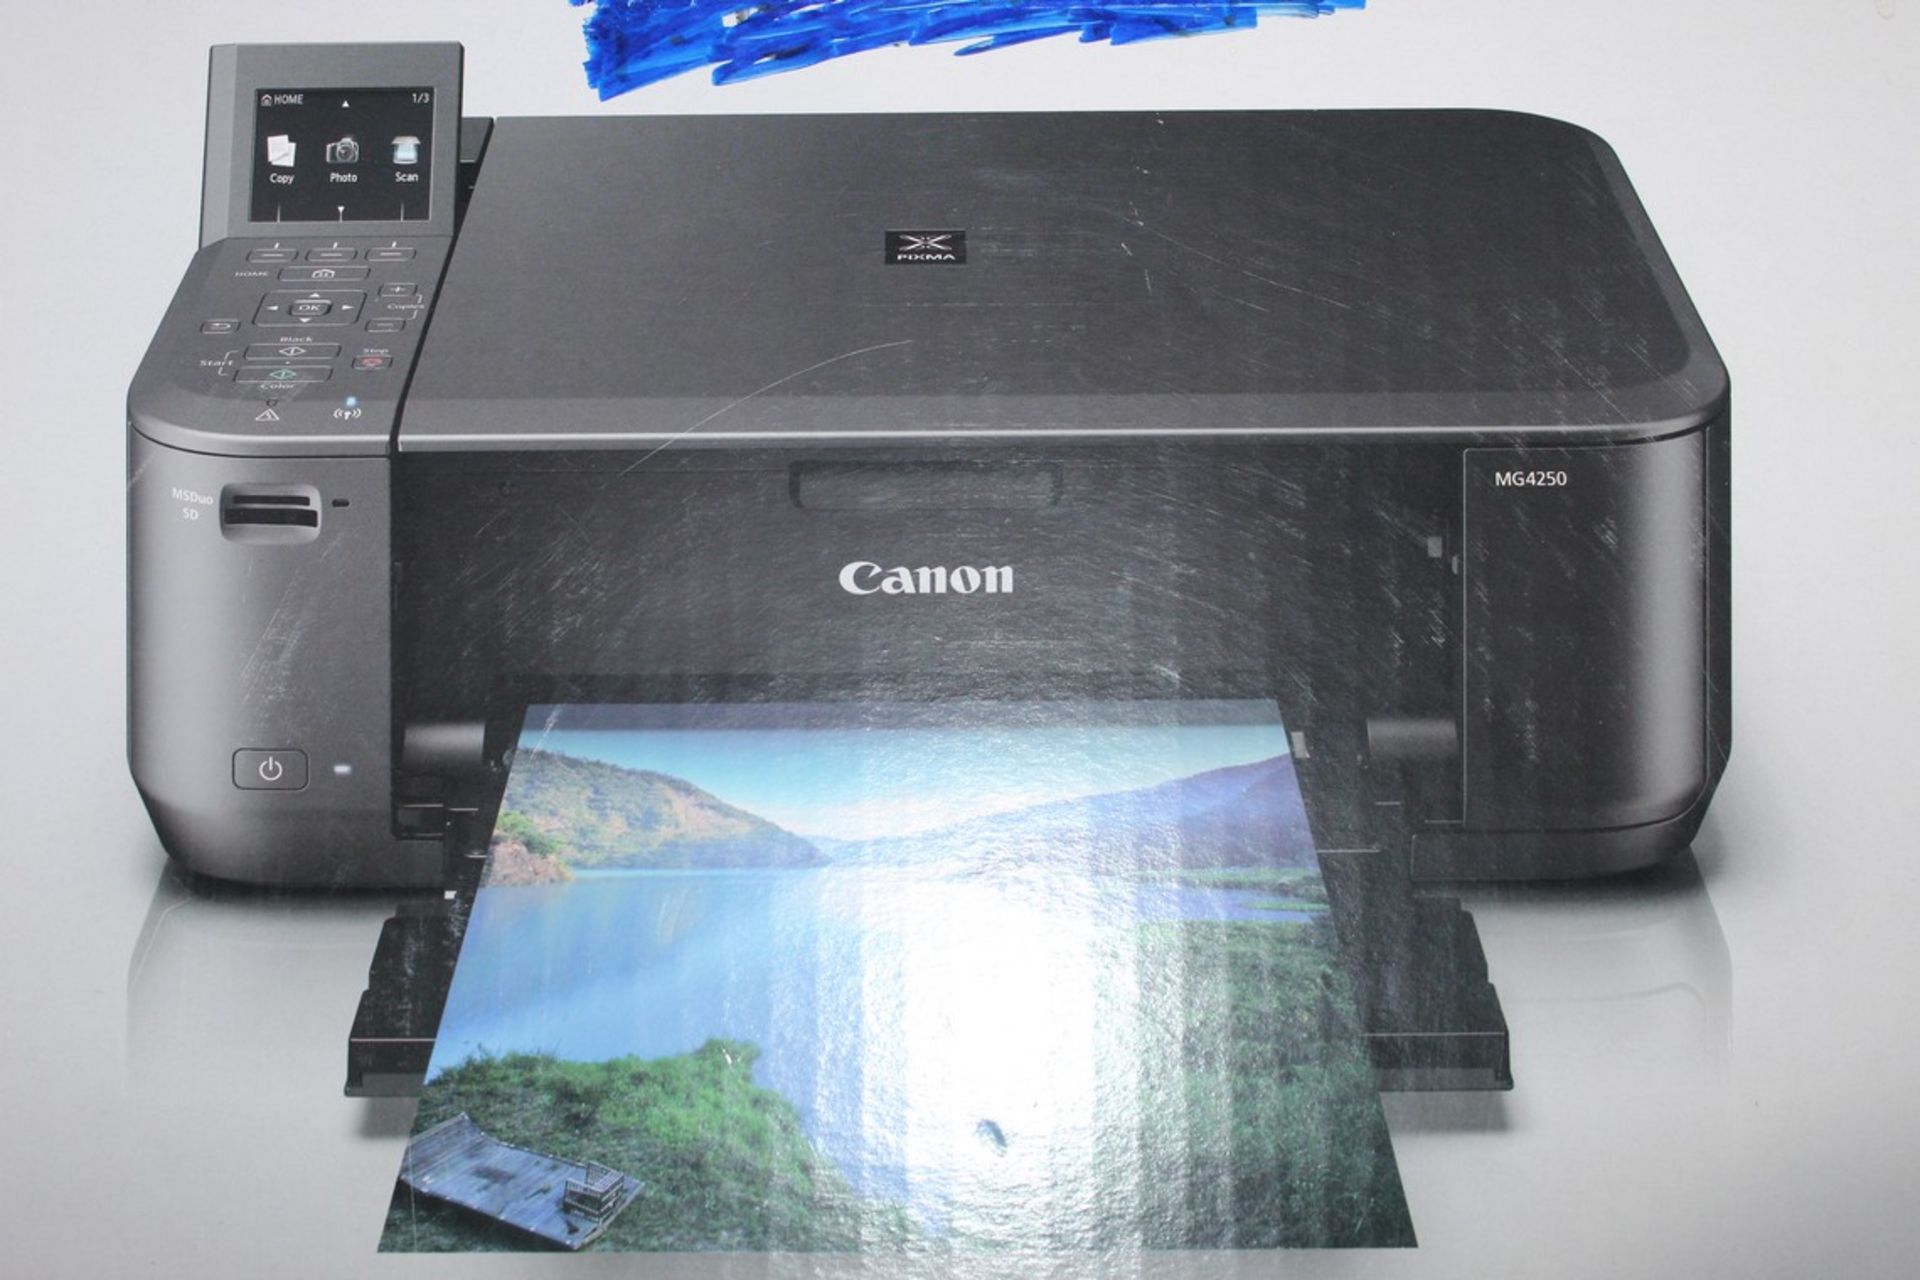 Boxed Canon Pixma MG4250 All In One Printer, Scanner, Copier RRP £50 (Public Viewing and